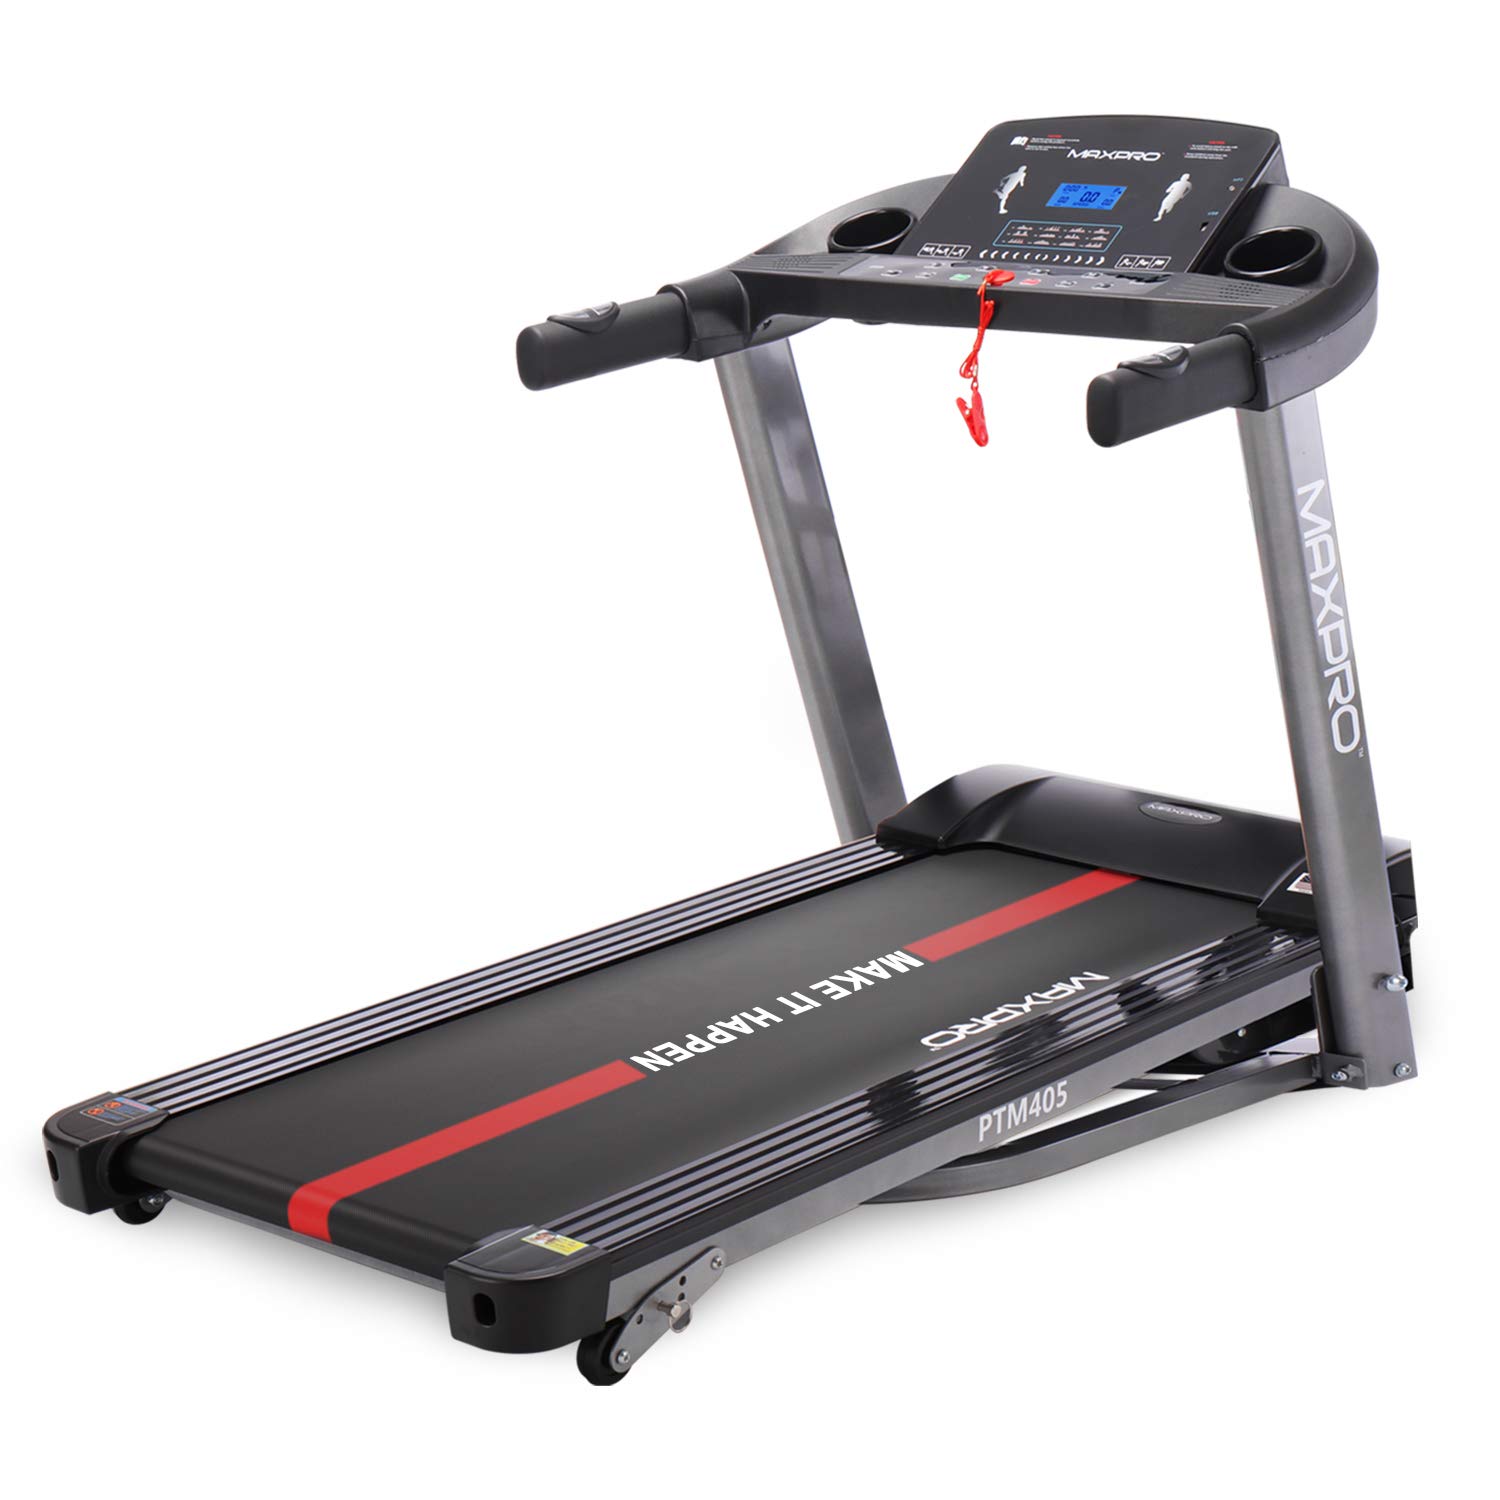 Best MAXPRO Treadmill for Home